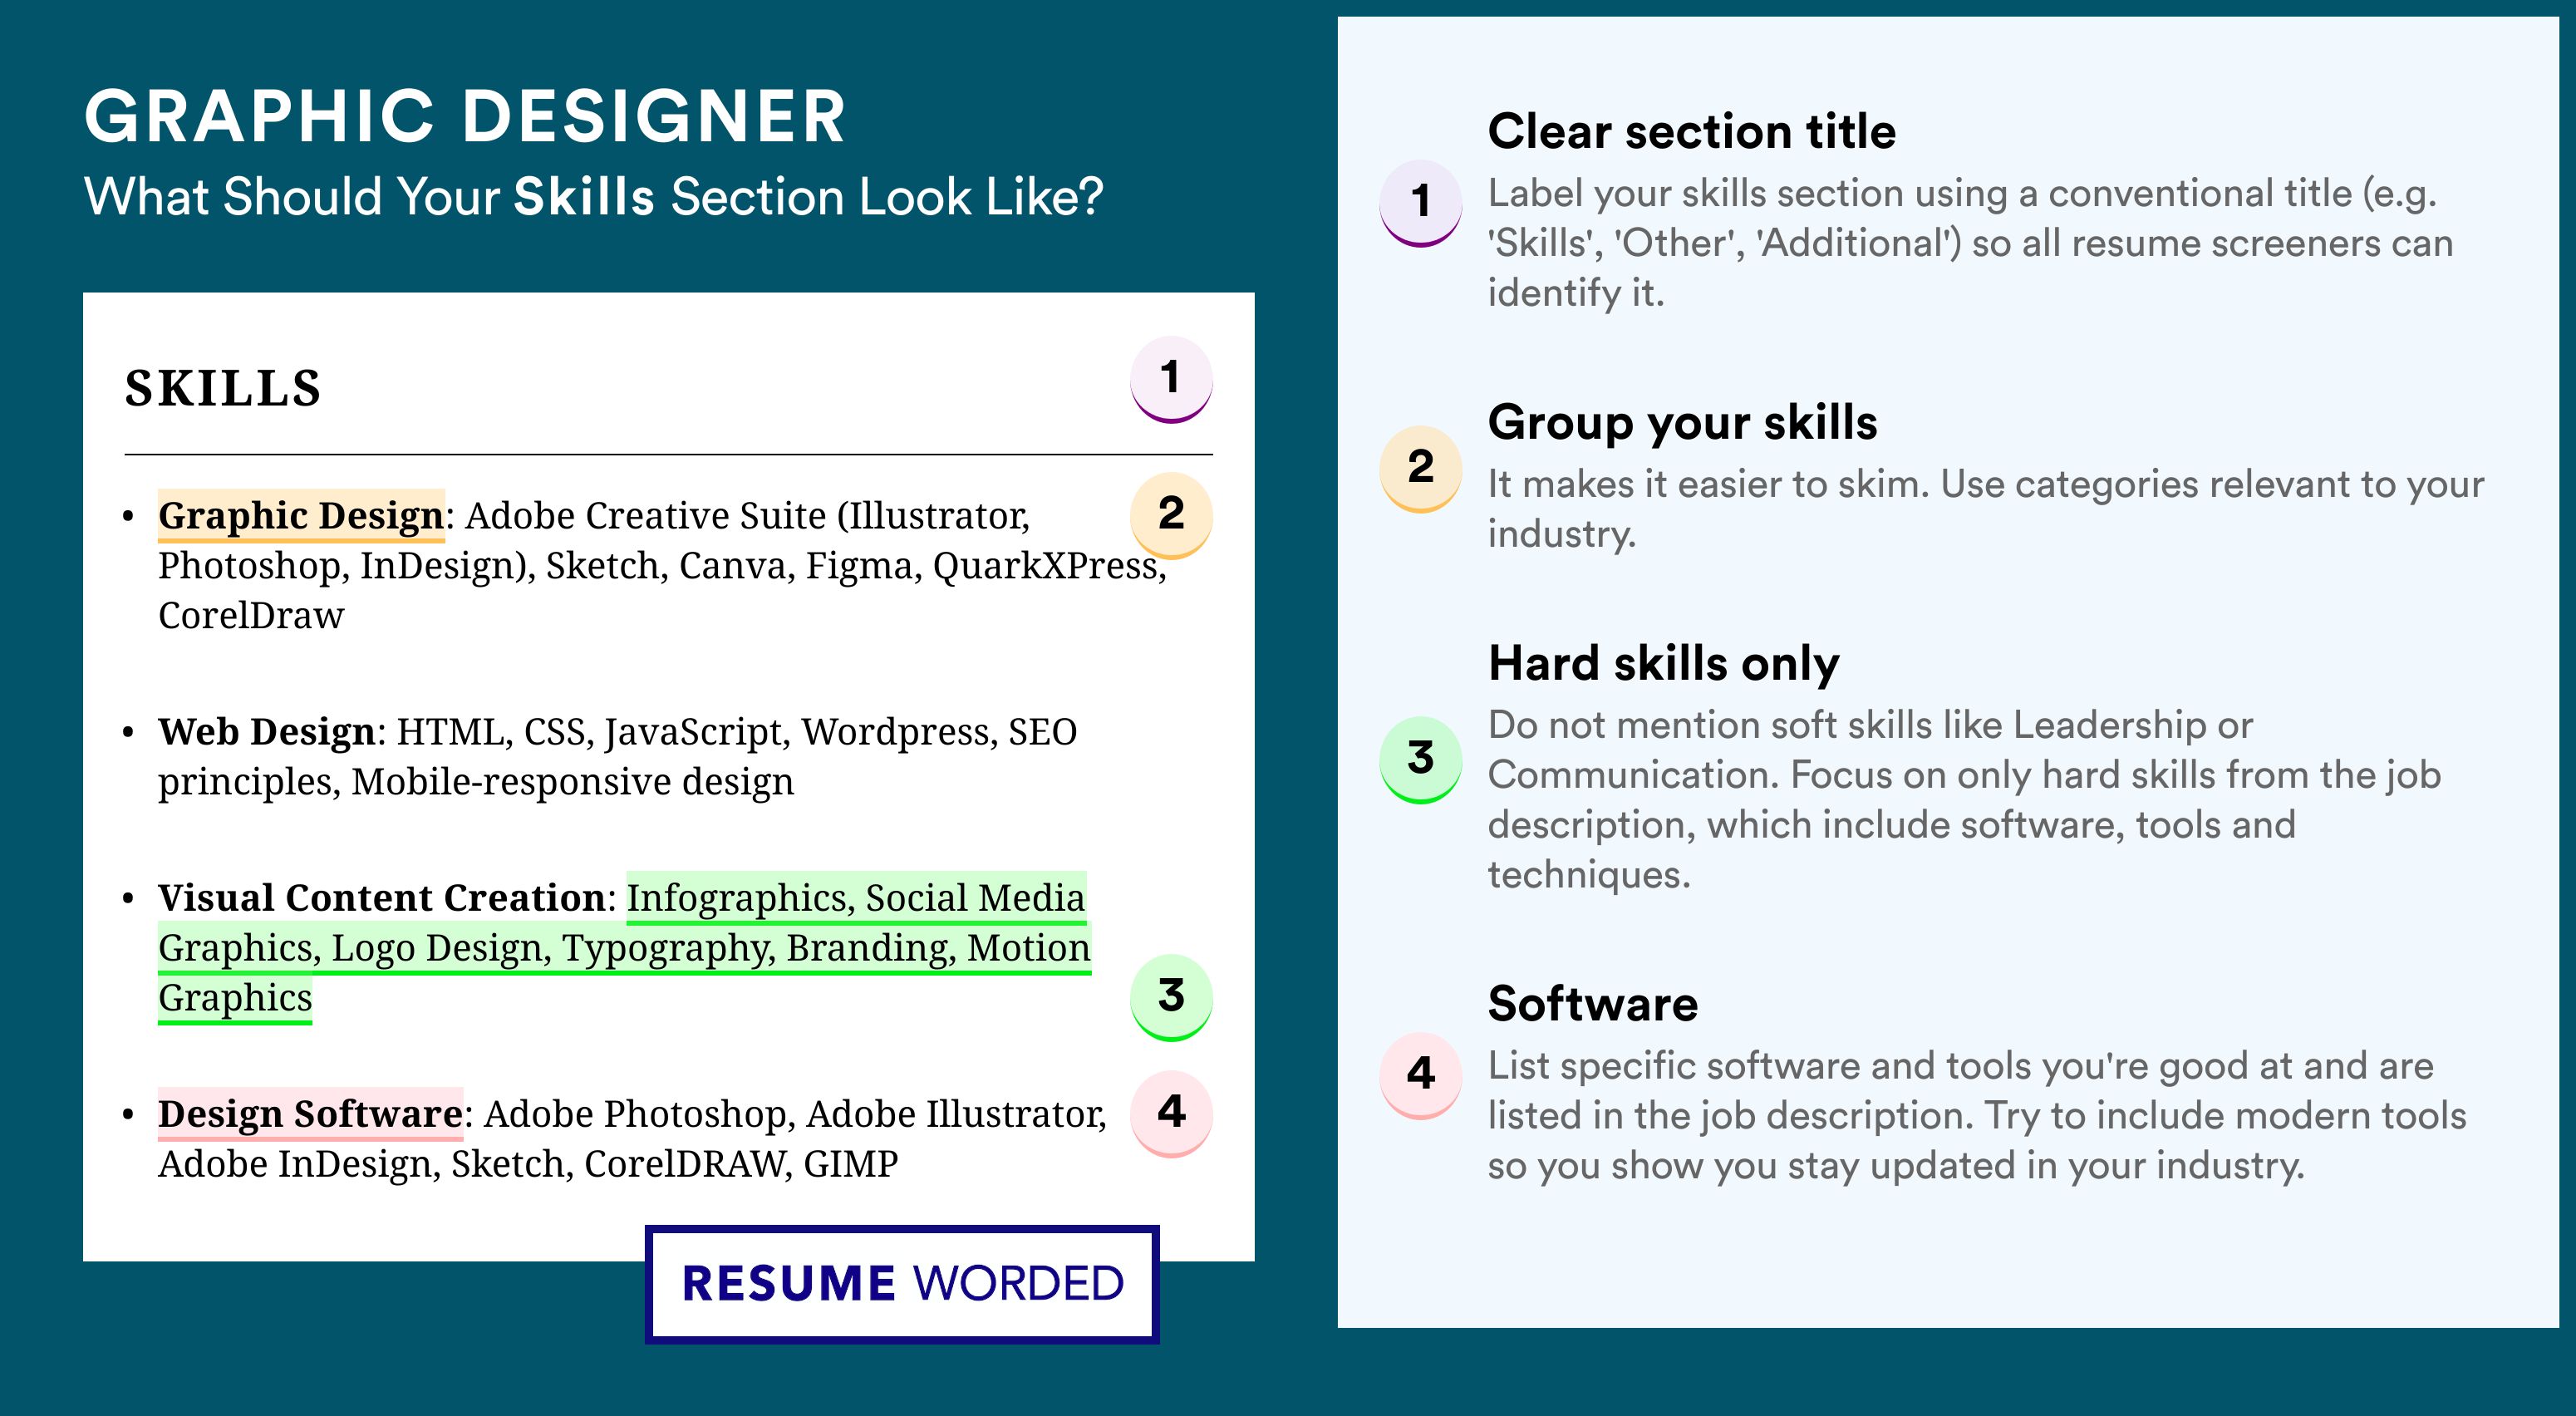 How To Write Your Skills Section - Graphic Designer Roles